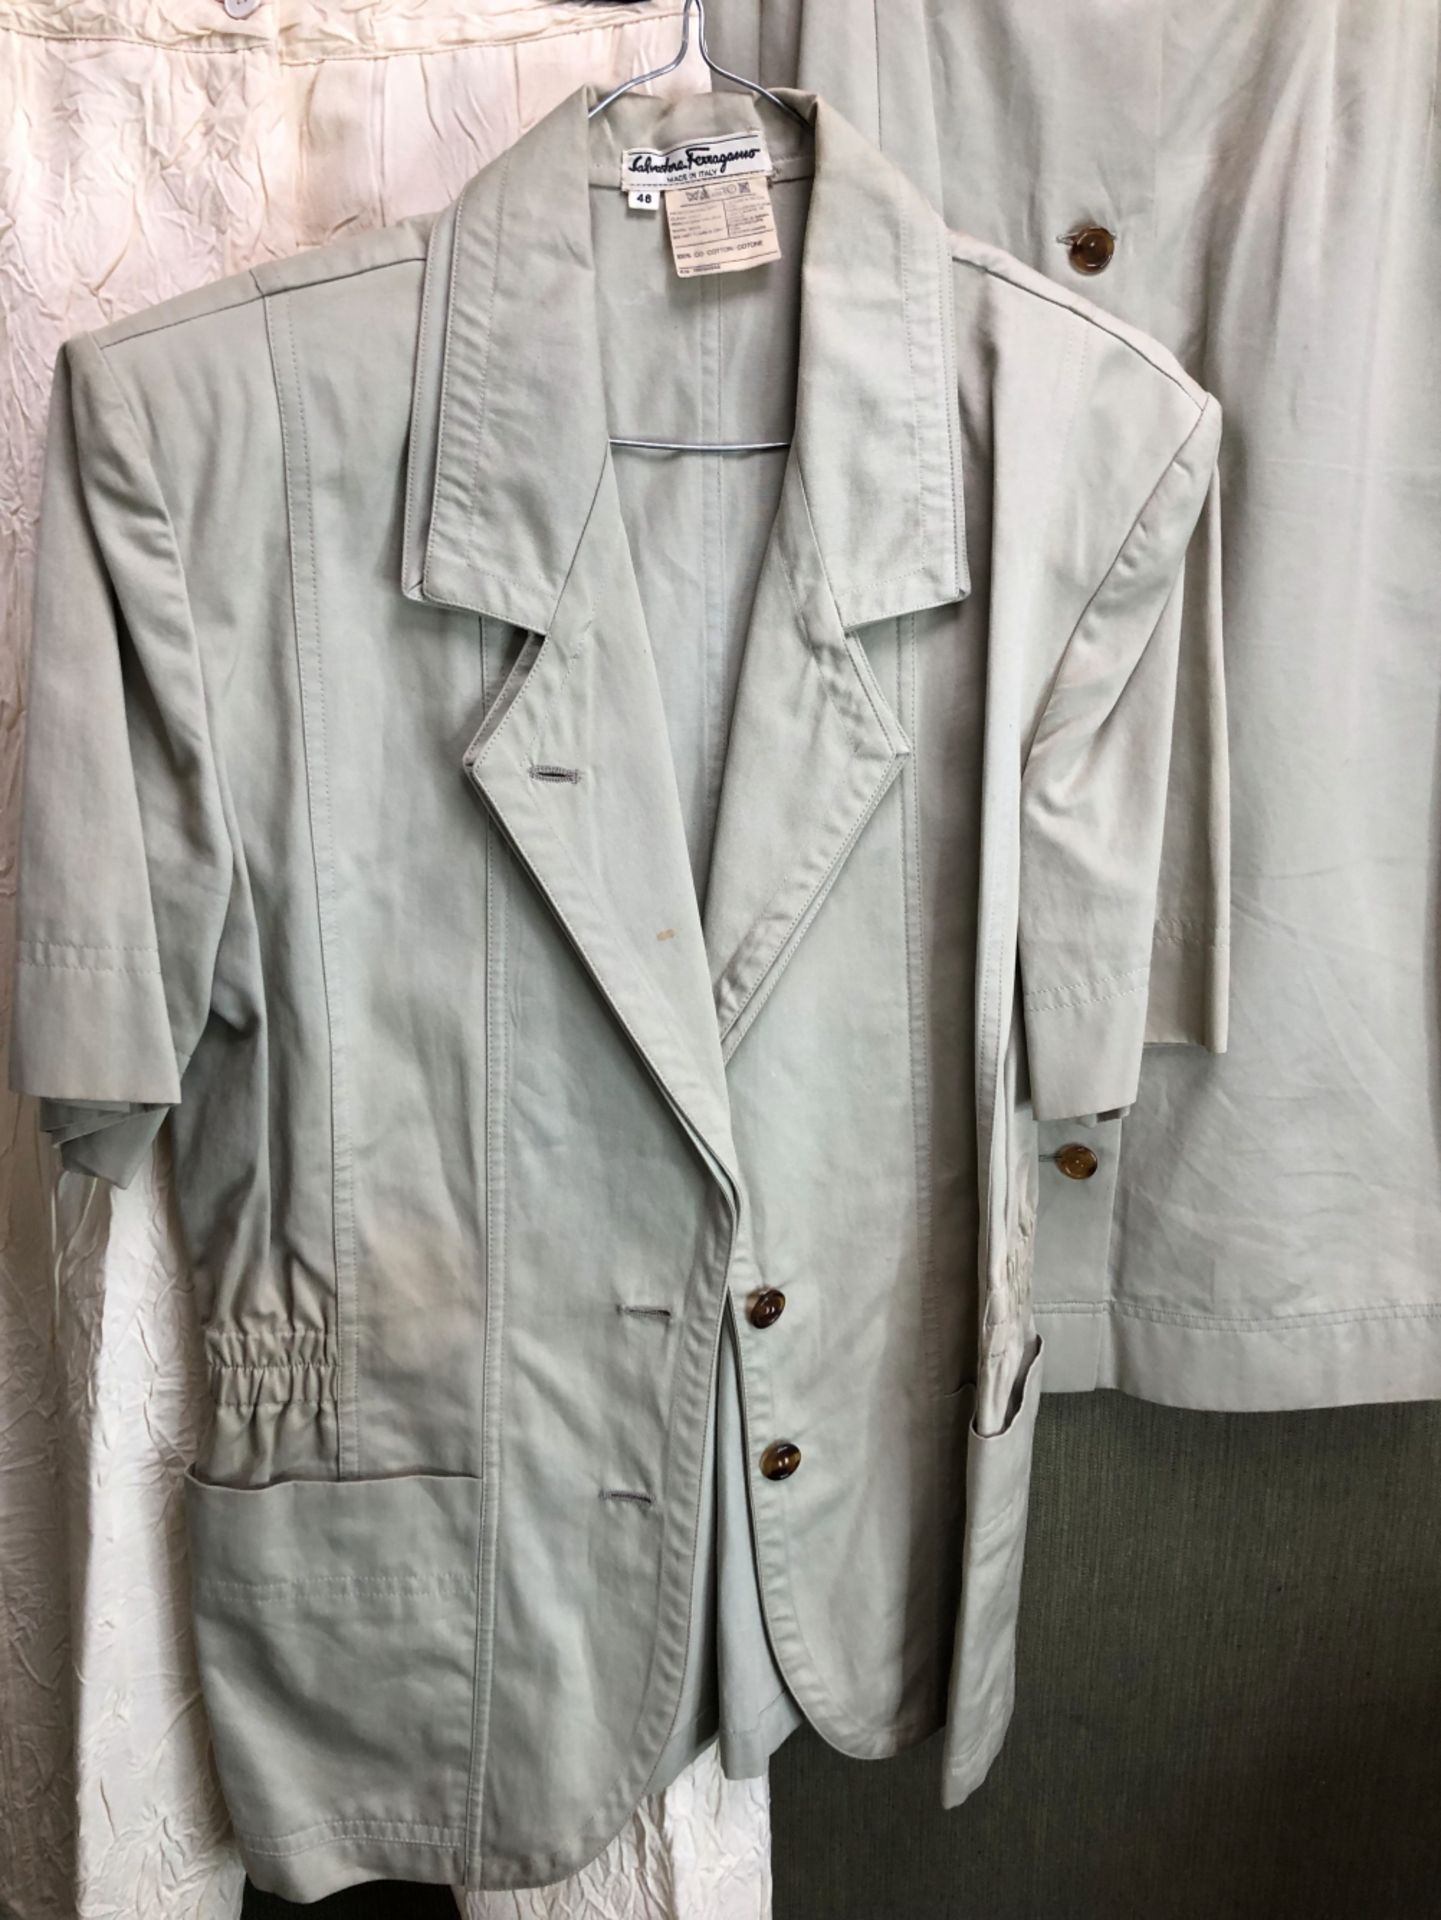 AN ISTANTE ITALY CREAM TROUSER SUIT SIZE 44, TOGETHER WITH A 100% COTTON SALVATORE FERRAGAMO - Image 2 of 13